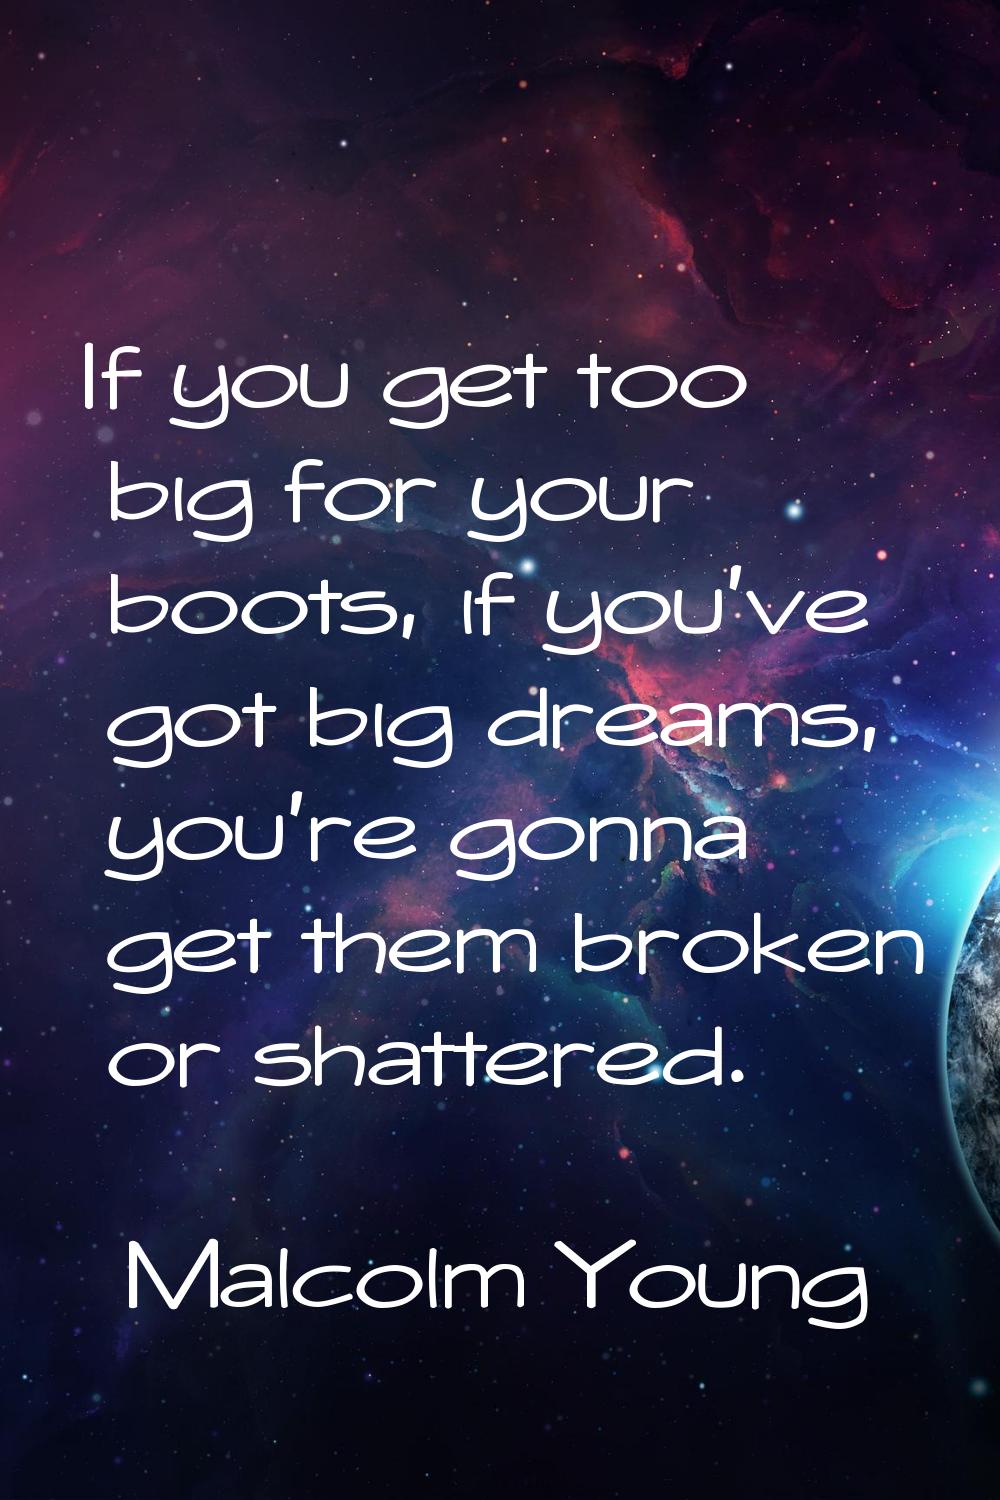 If you get too big for your boots, if you've got big dreams, you're gonna get them broken or shatte